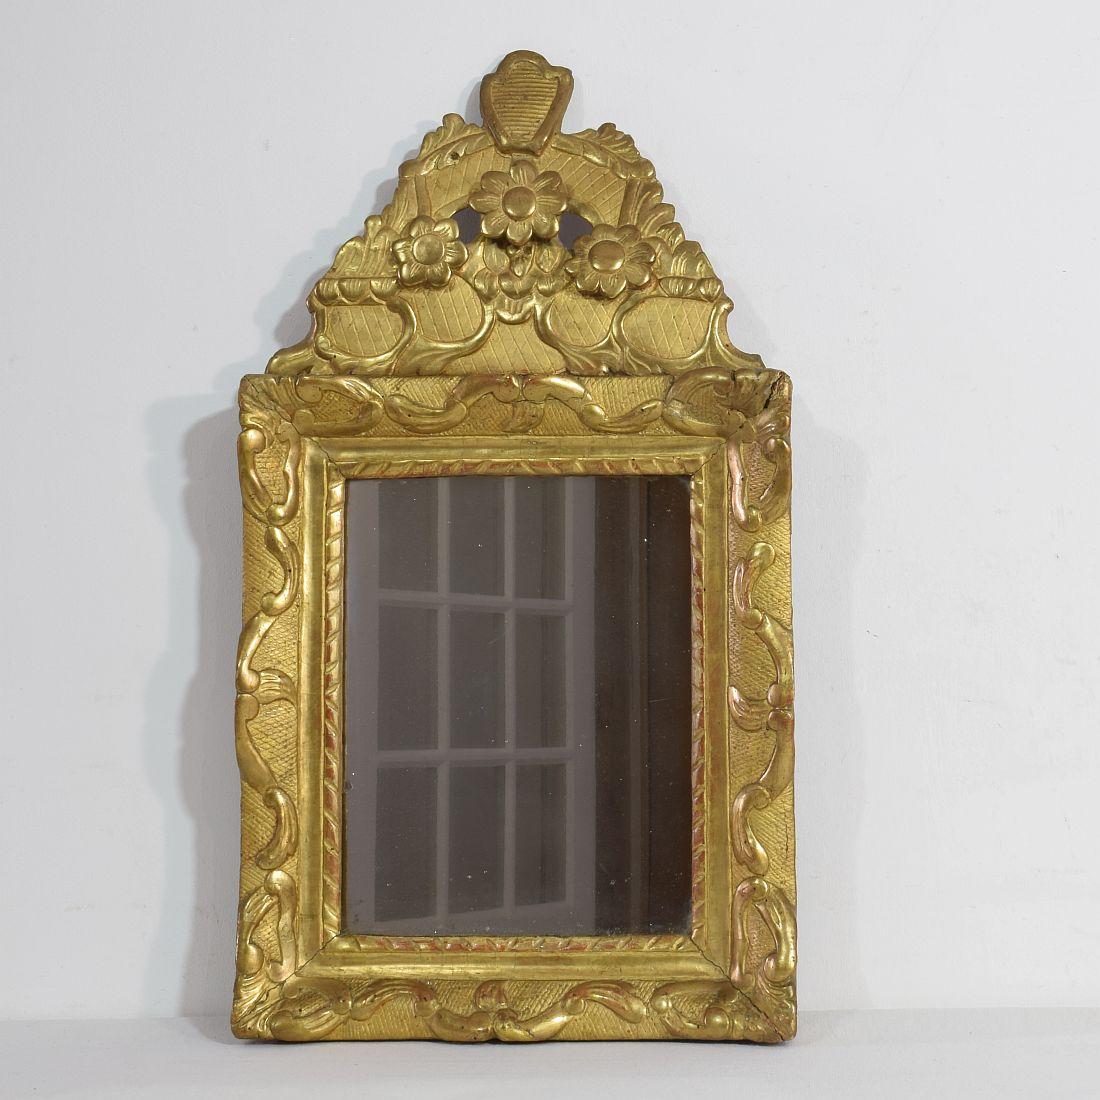 Small Louis XV giltwood mirror with beautiful original weathered mirror glass
France, circa 1750. Weathered., small losses and old repairs.